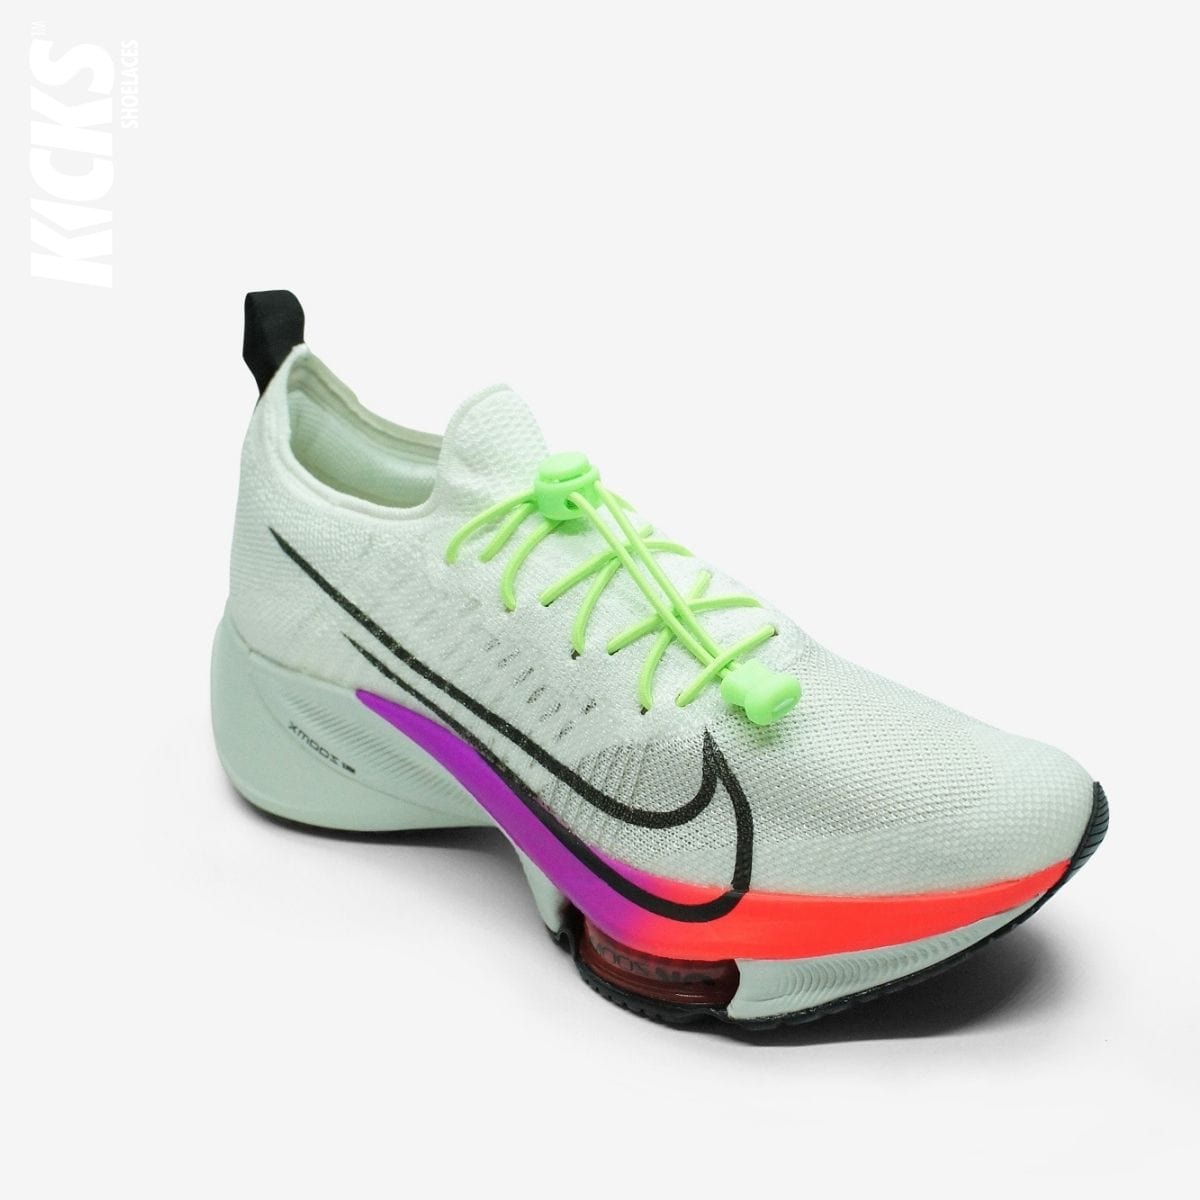 quick-laces-with-fluorescent-green-elastic-no-tie-shoelaces-on-nike-running-shoe-by-kicks-shoelaces